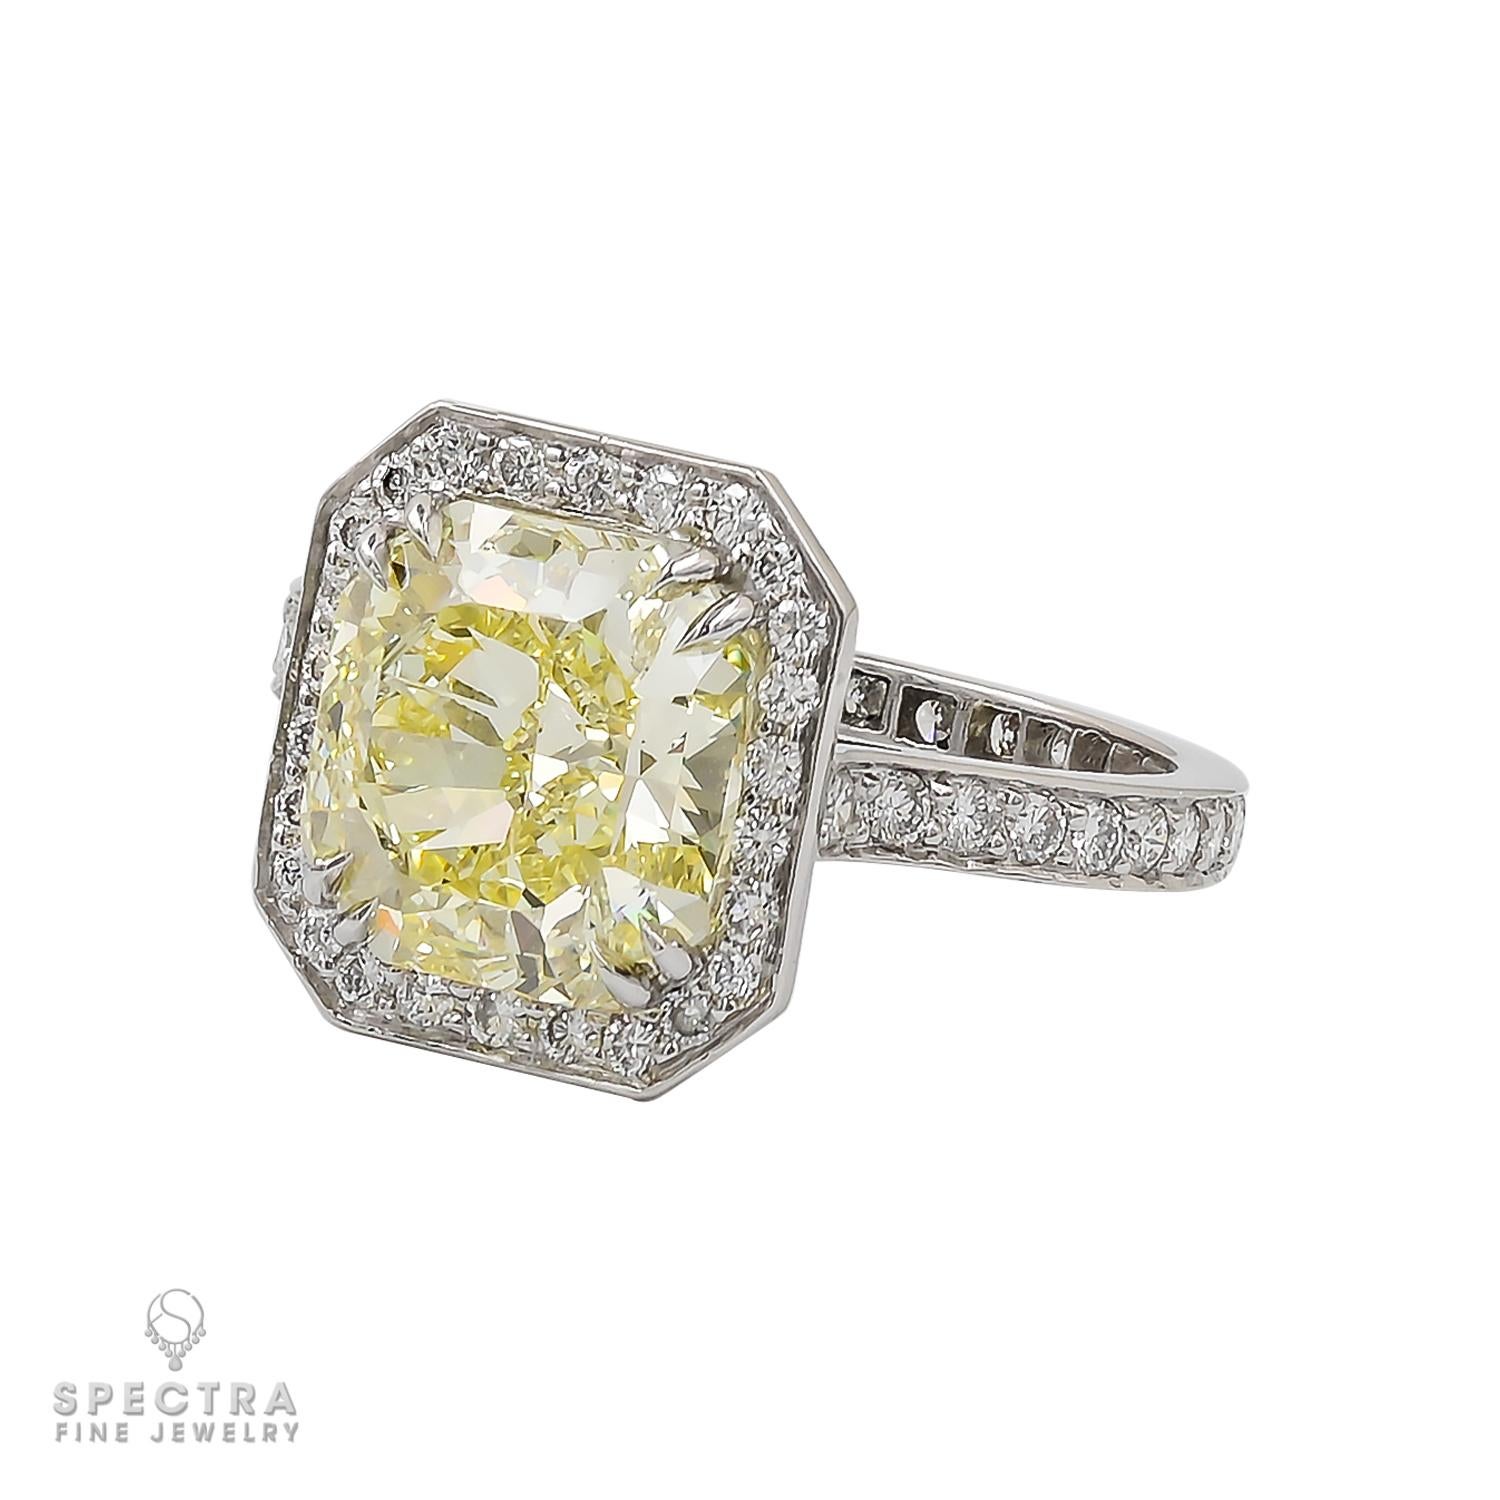 Embark on a journey of eternal love with our breathtaking engagement ring, graced by a magnificent 4.05-carat Fancy Yellow Diamond. This radiant-cut gem, boasting VVS2 clarity and GIA certification, is a luminous testament to the extraordinary.

A